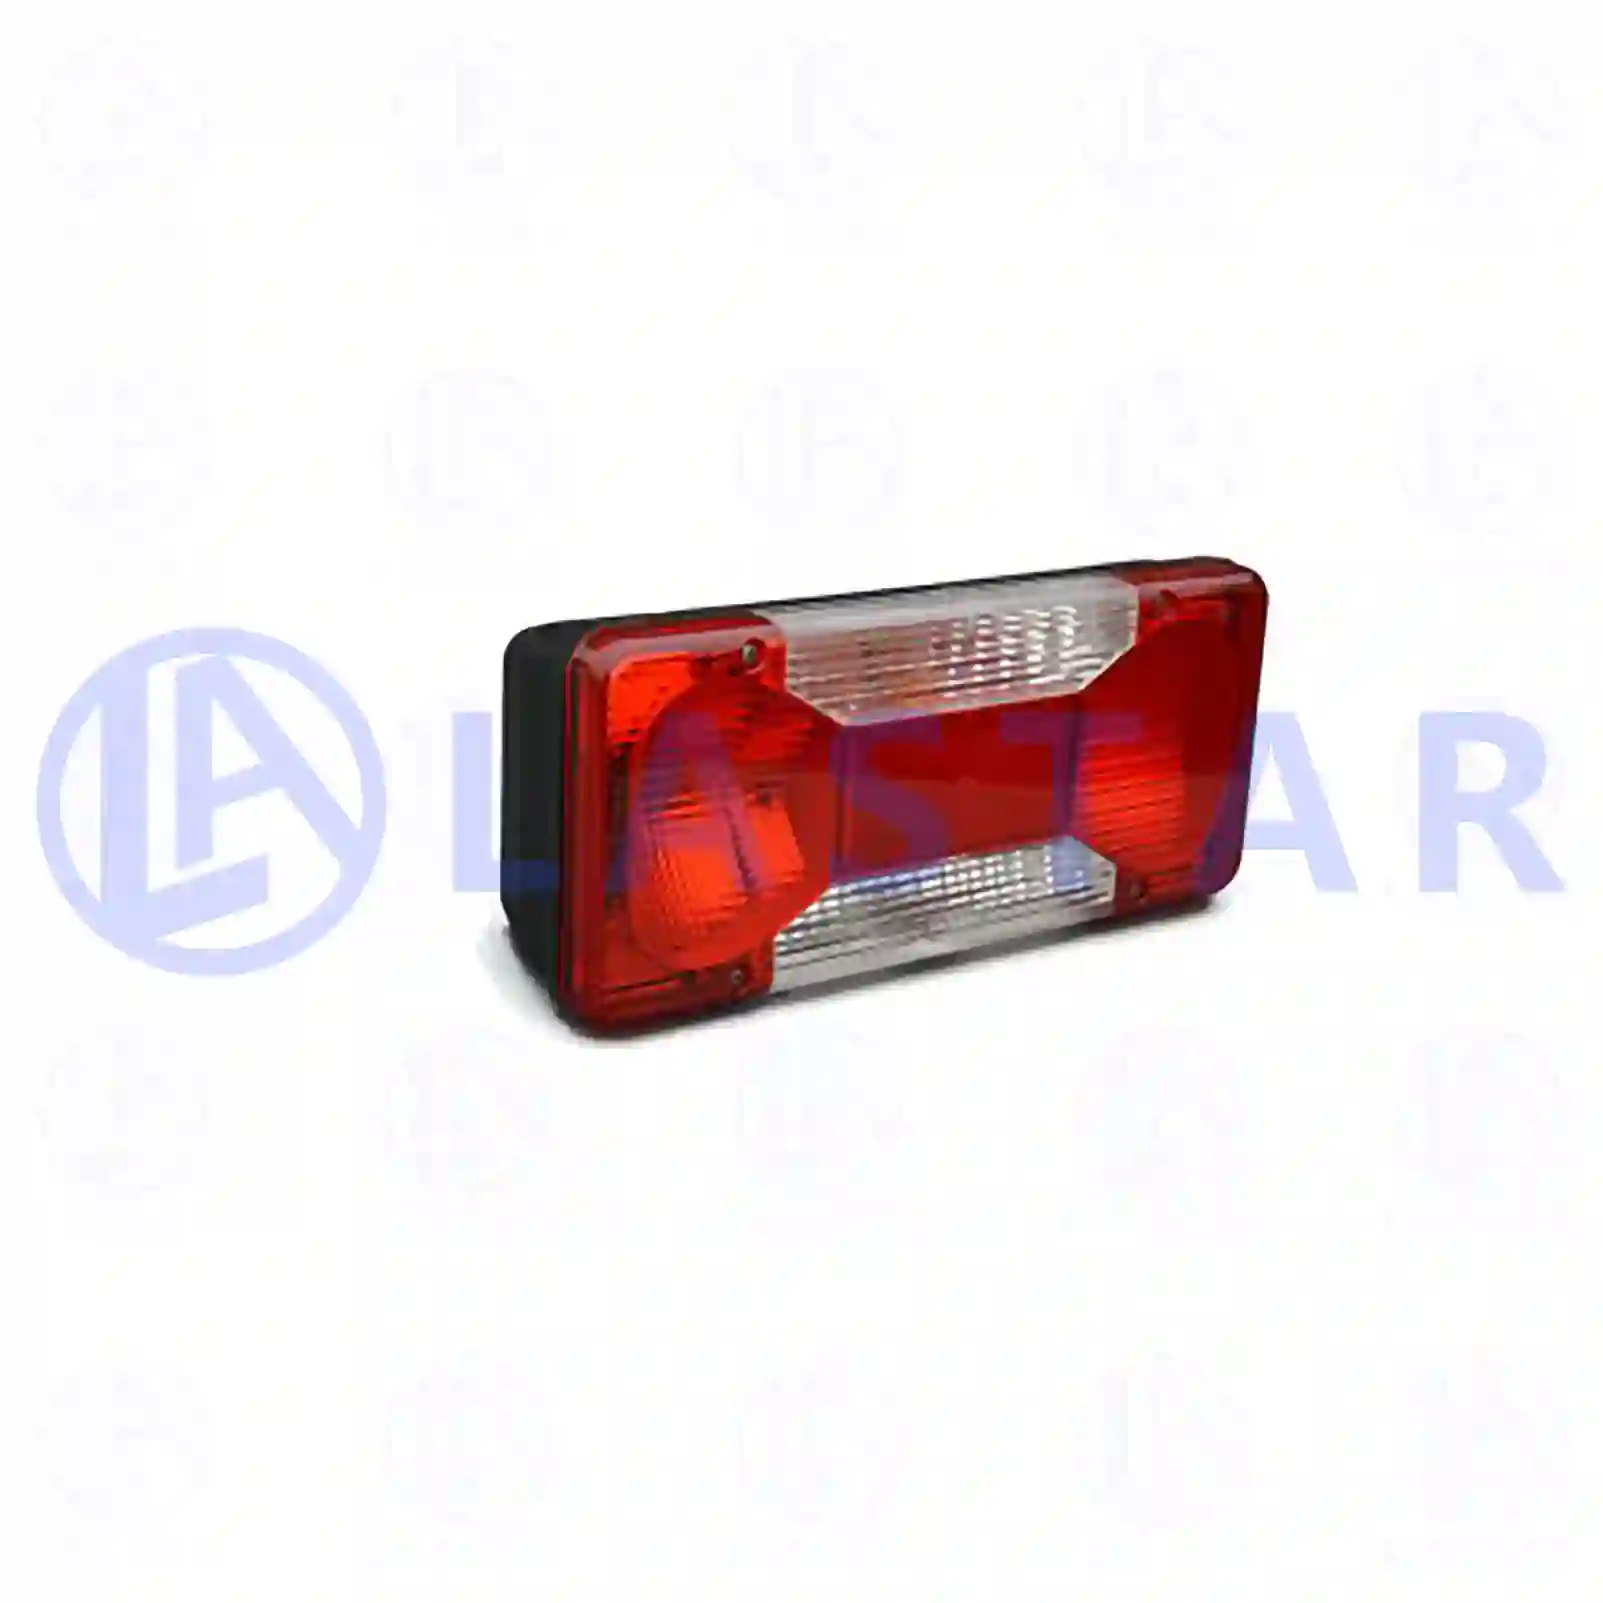 Tail lamp, left, 77712983, 5801351218, 5801631438, 69500032, ||  77712983 Lastar Spare Part | Truck Spare Parts, Auotomotive Spare Parts Tail lamp, left, 77712983, 5801351218, 5801631438, 69500032, ||  77712983 Lastar Spare Part | Truck Spare Parts, Auotomotive Spare Parts